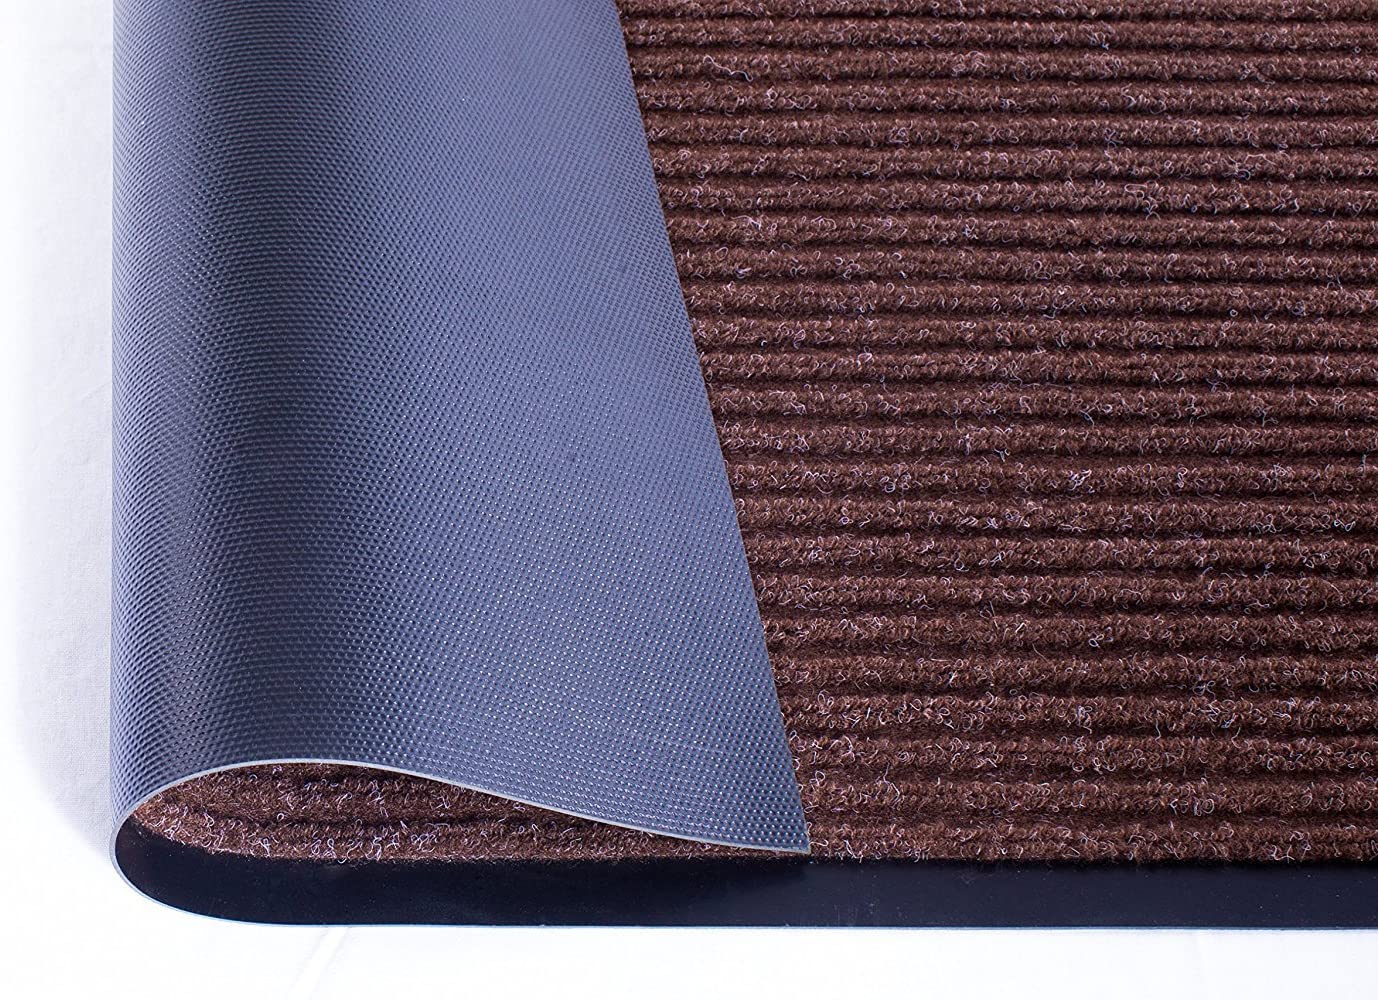 Heavy Duty Non-slip Rubber Barrier Mat Large Small indoor outdoor kitchen  Rugs